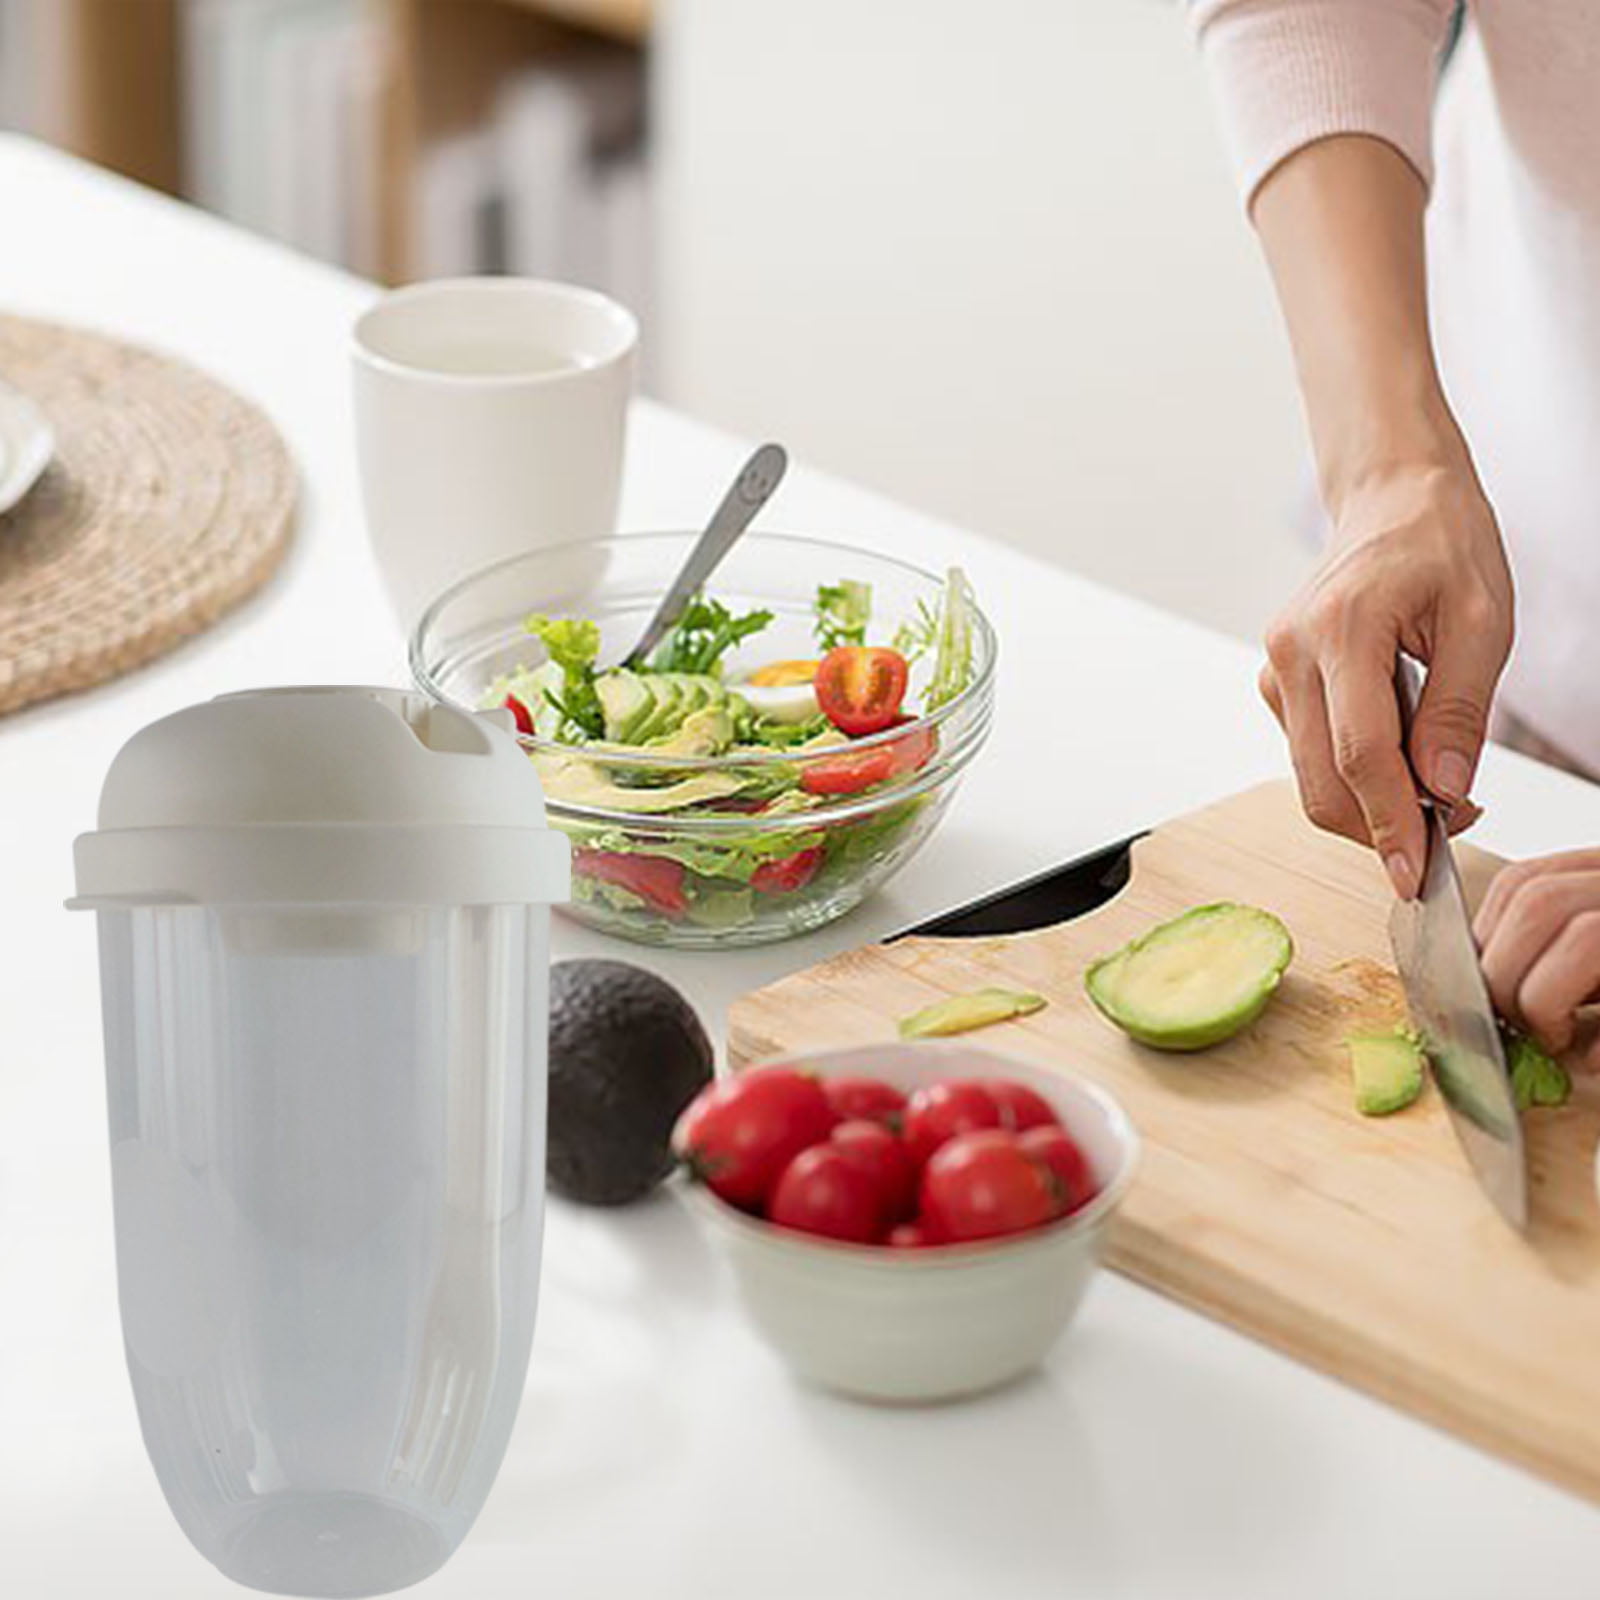 JECCYE Salad Dressing Container to Go - 2022 Keep Fit Salad Meal Shaker Cup  with Fork and Salad Dressing Holder, Portable Vegetable Breakfast for